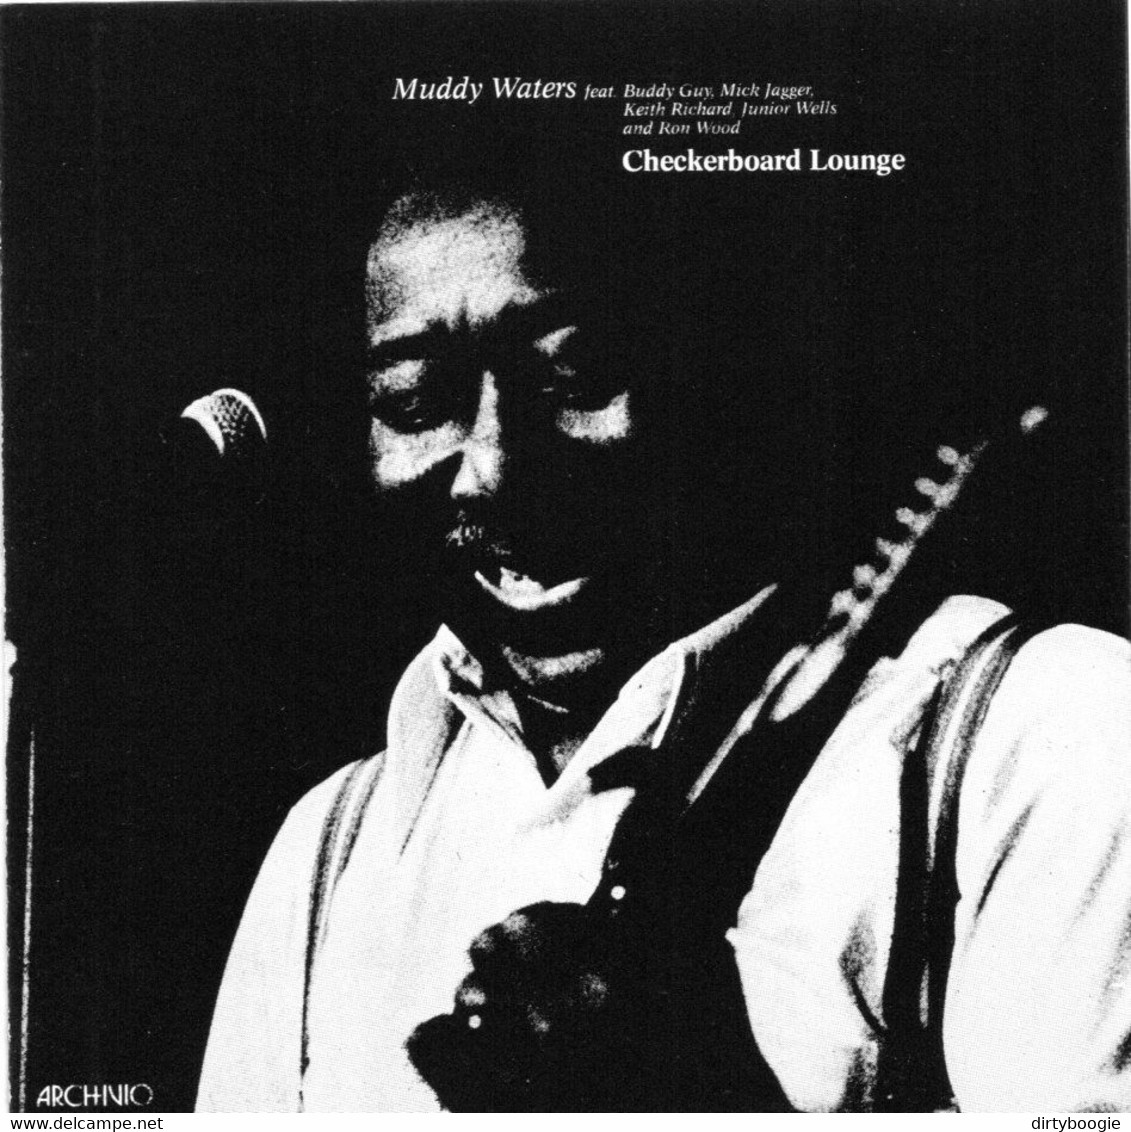 Muddy WATERS - Checkerboard Lounge - CD - Blues